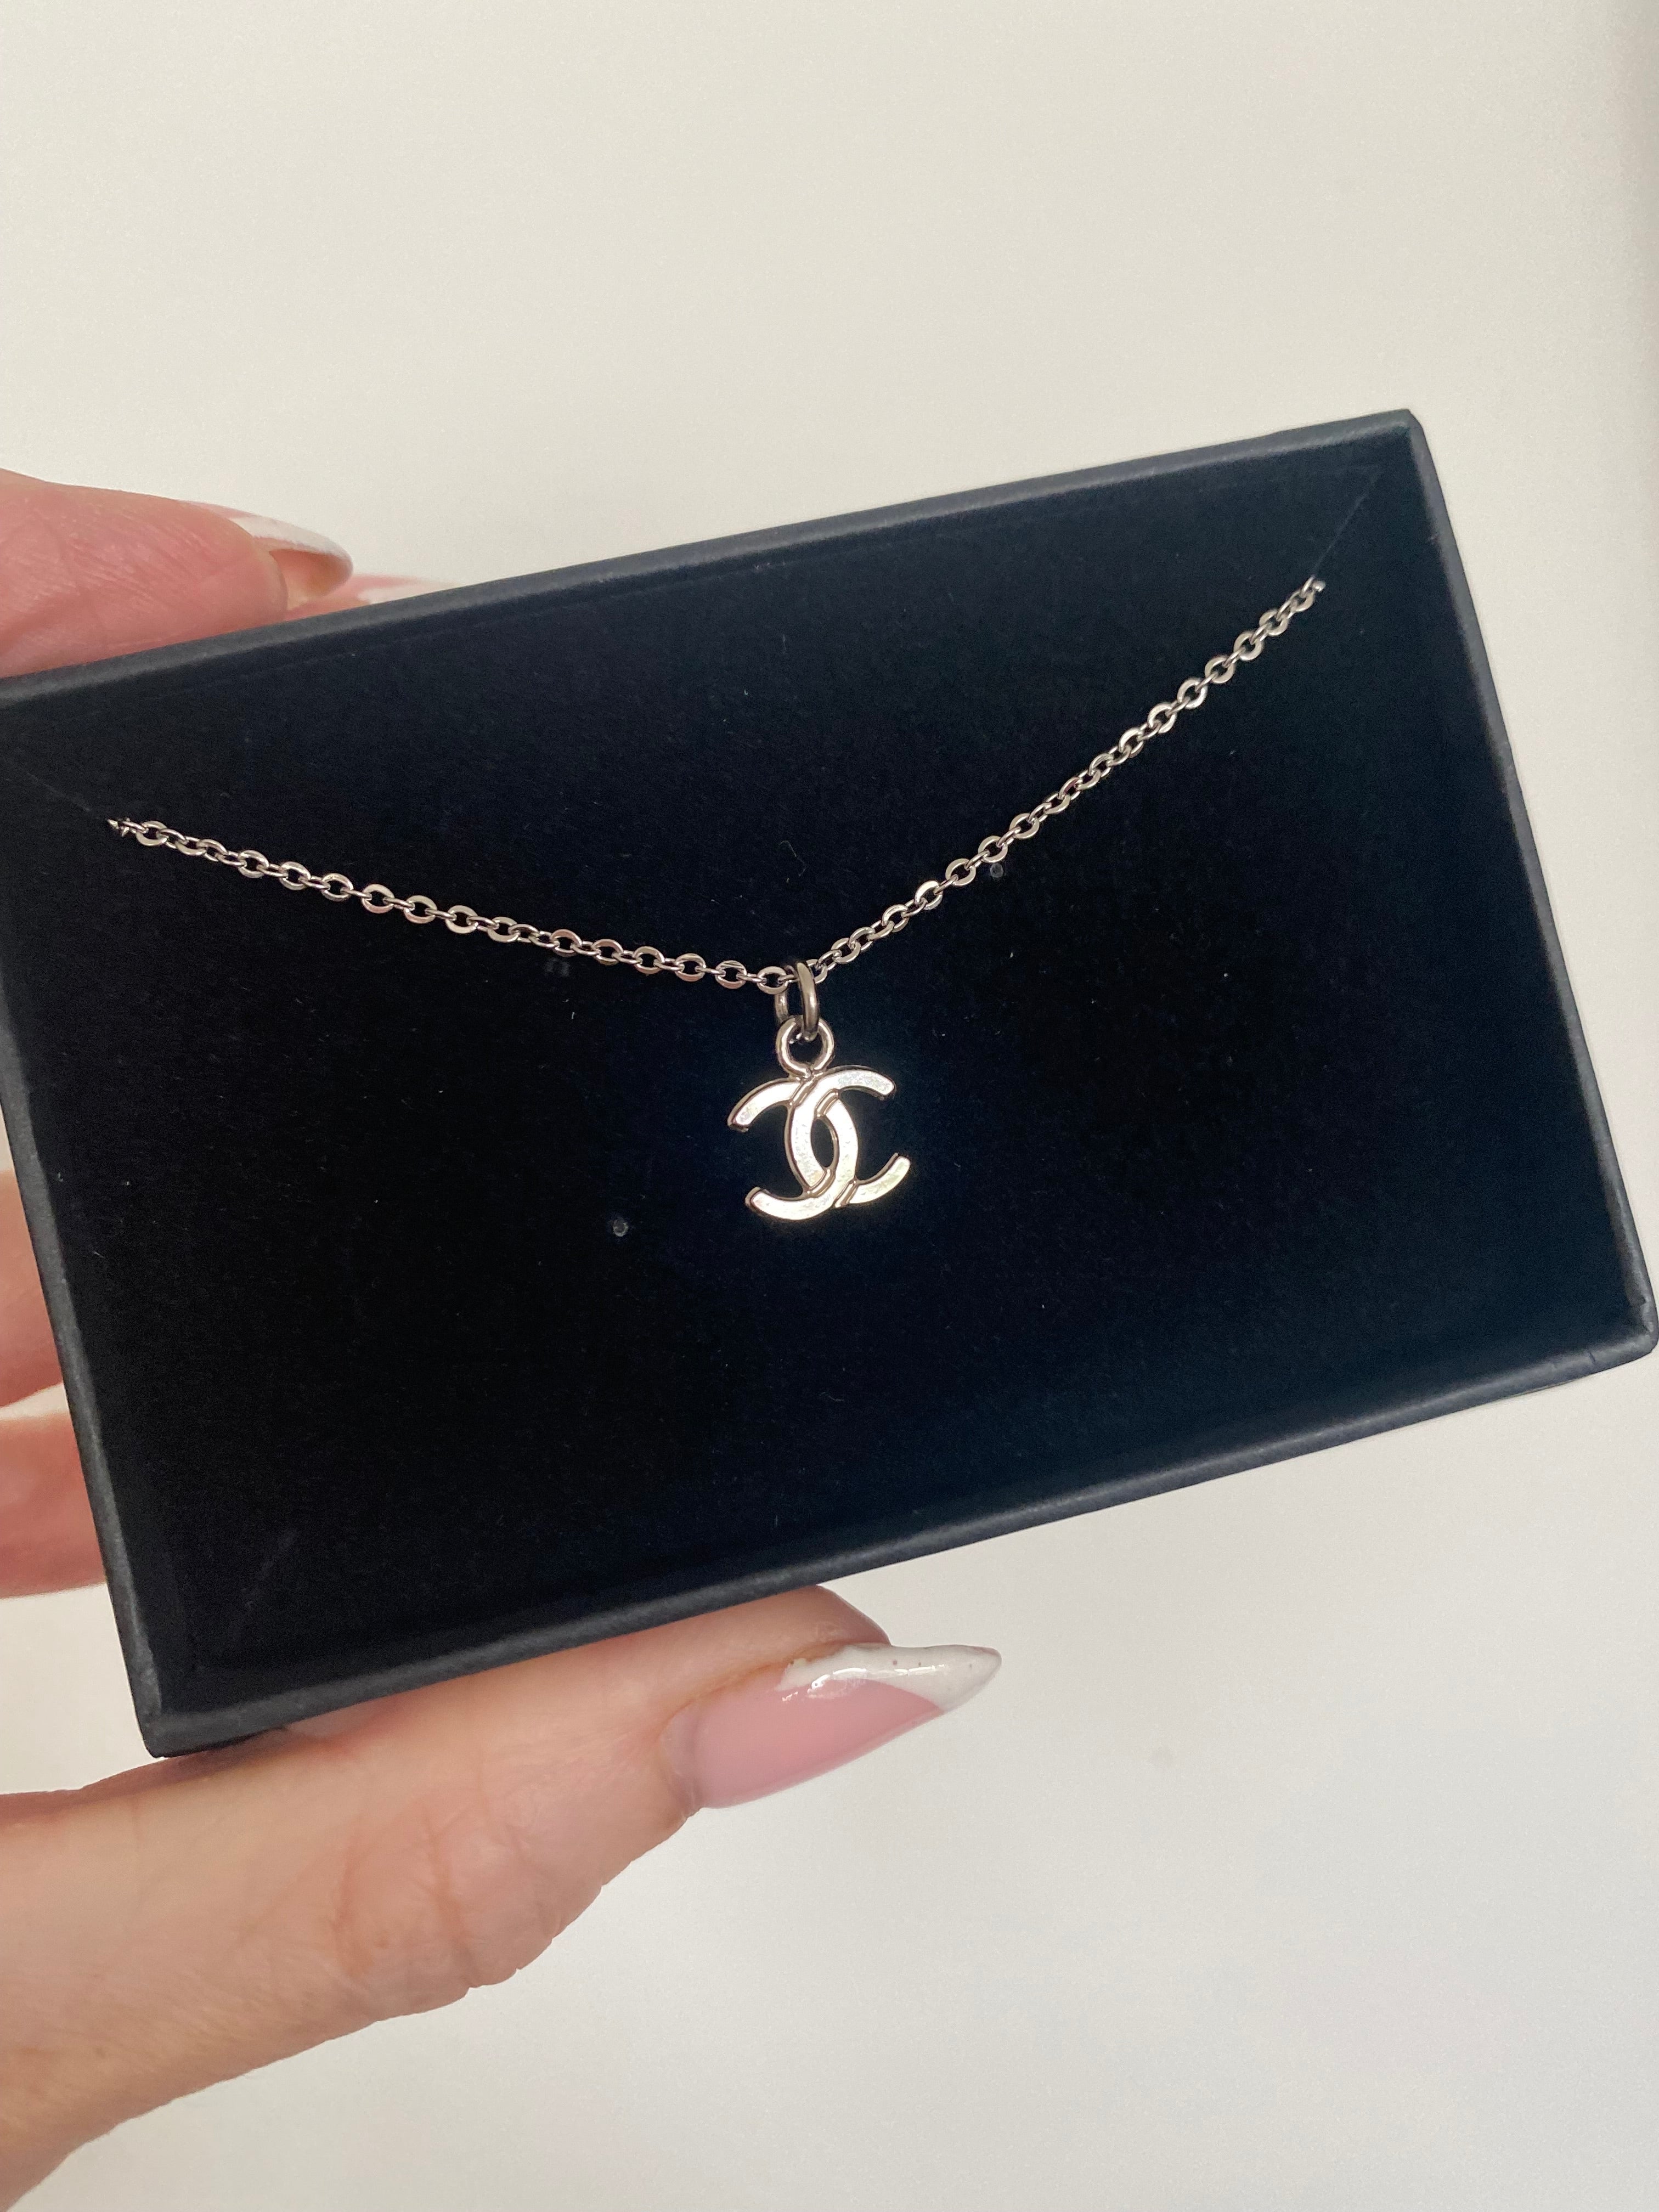 Reworked Chanel Vintage Jewellery - Pre Owned Chanel